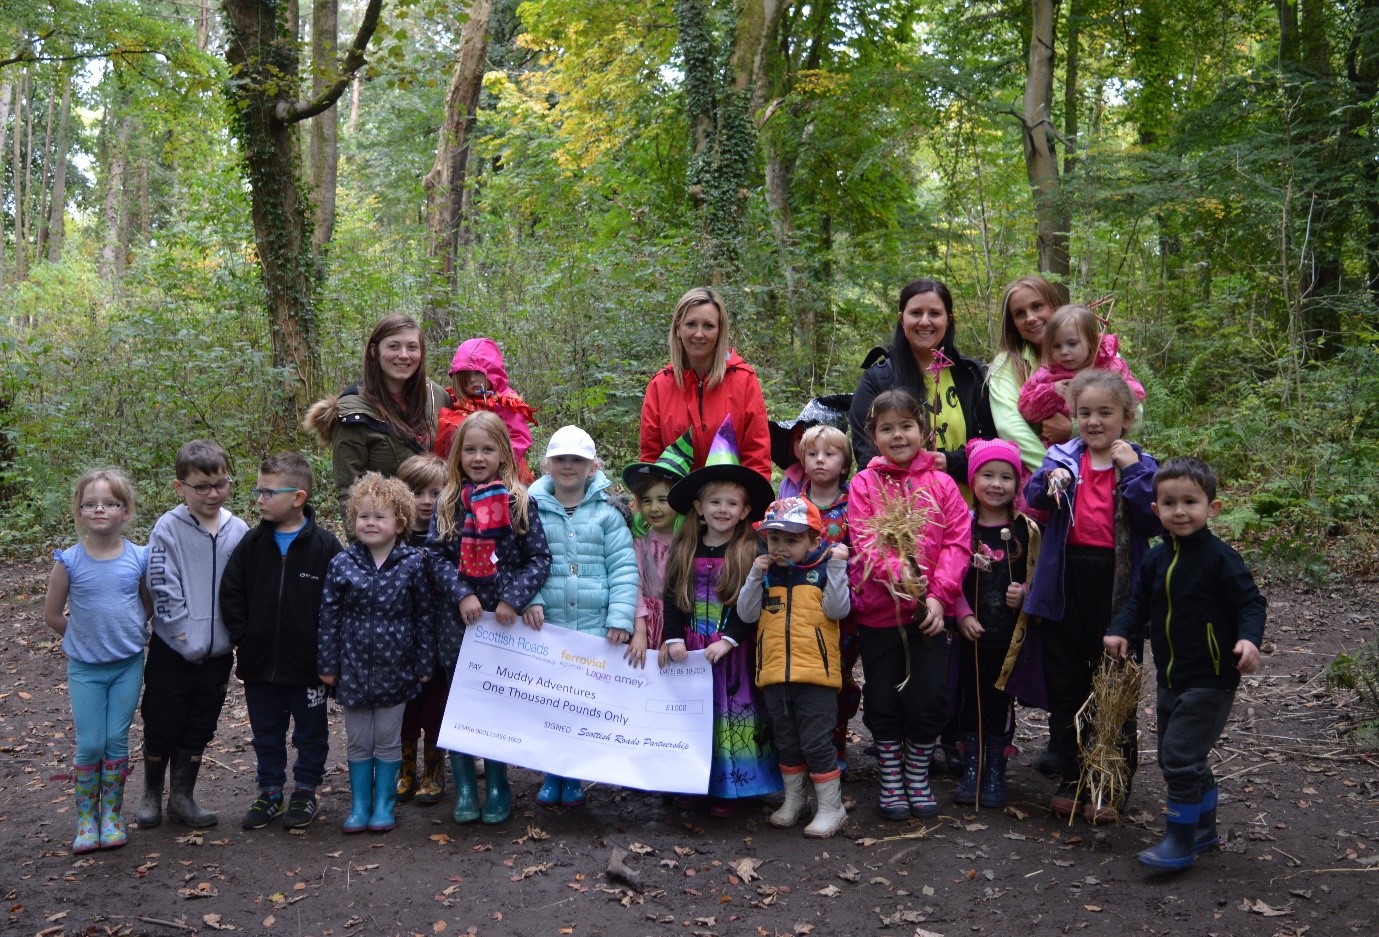 Scottish Roads Partnership presented Muddy Adventures with a bumper cheque for £1,000 from its Good Neighbour Fund